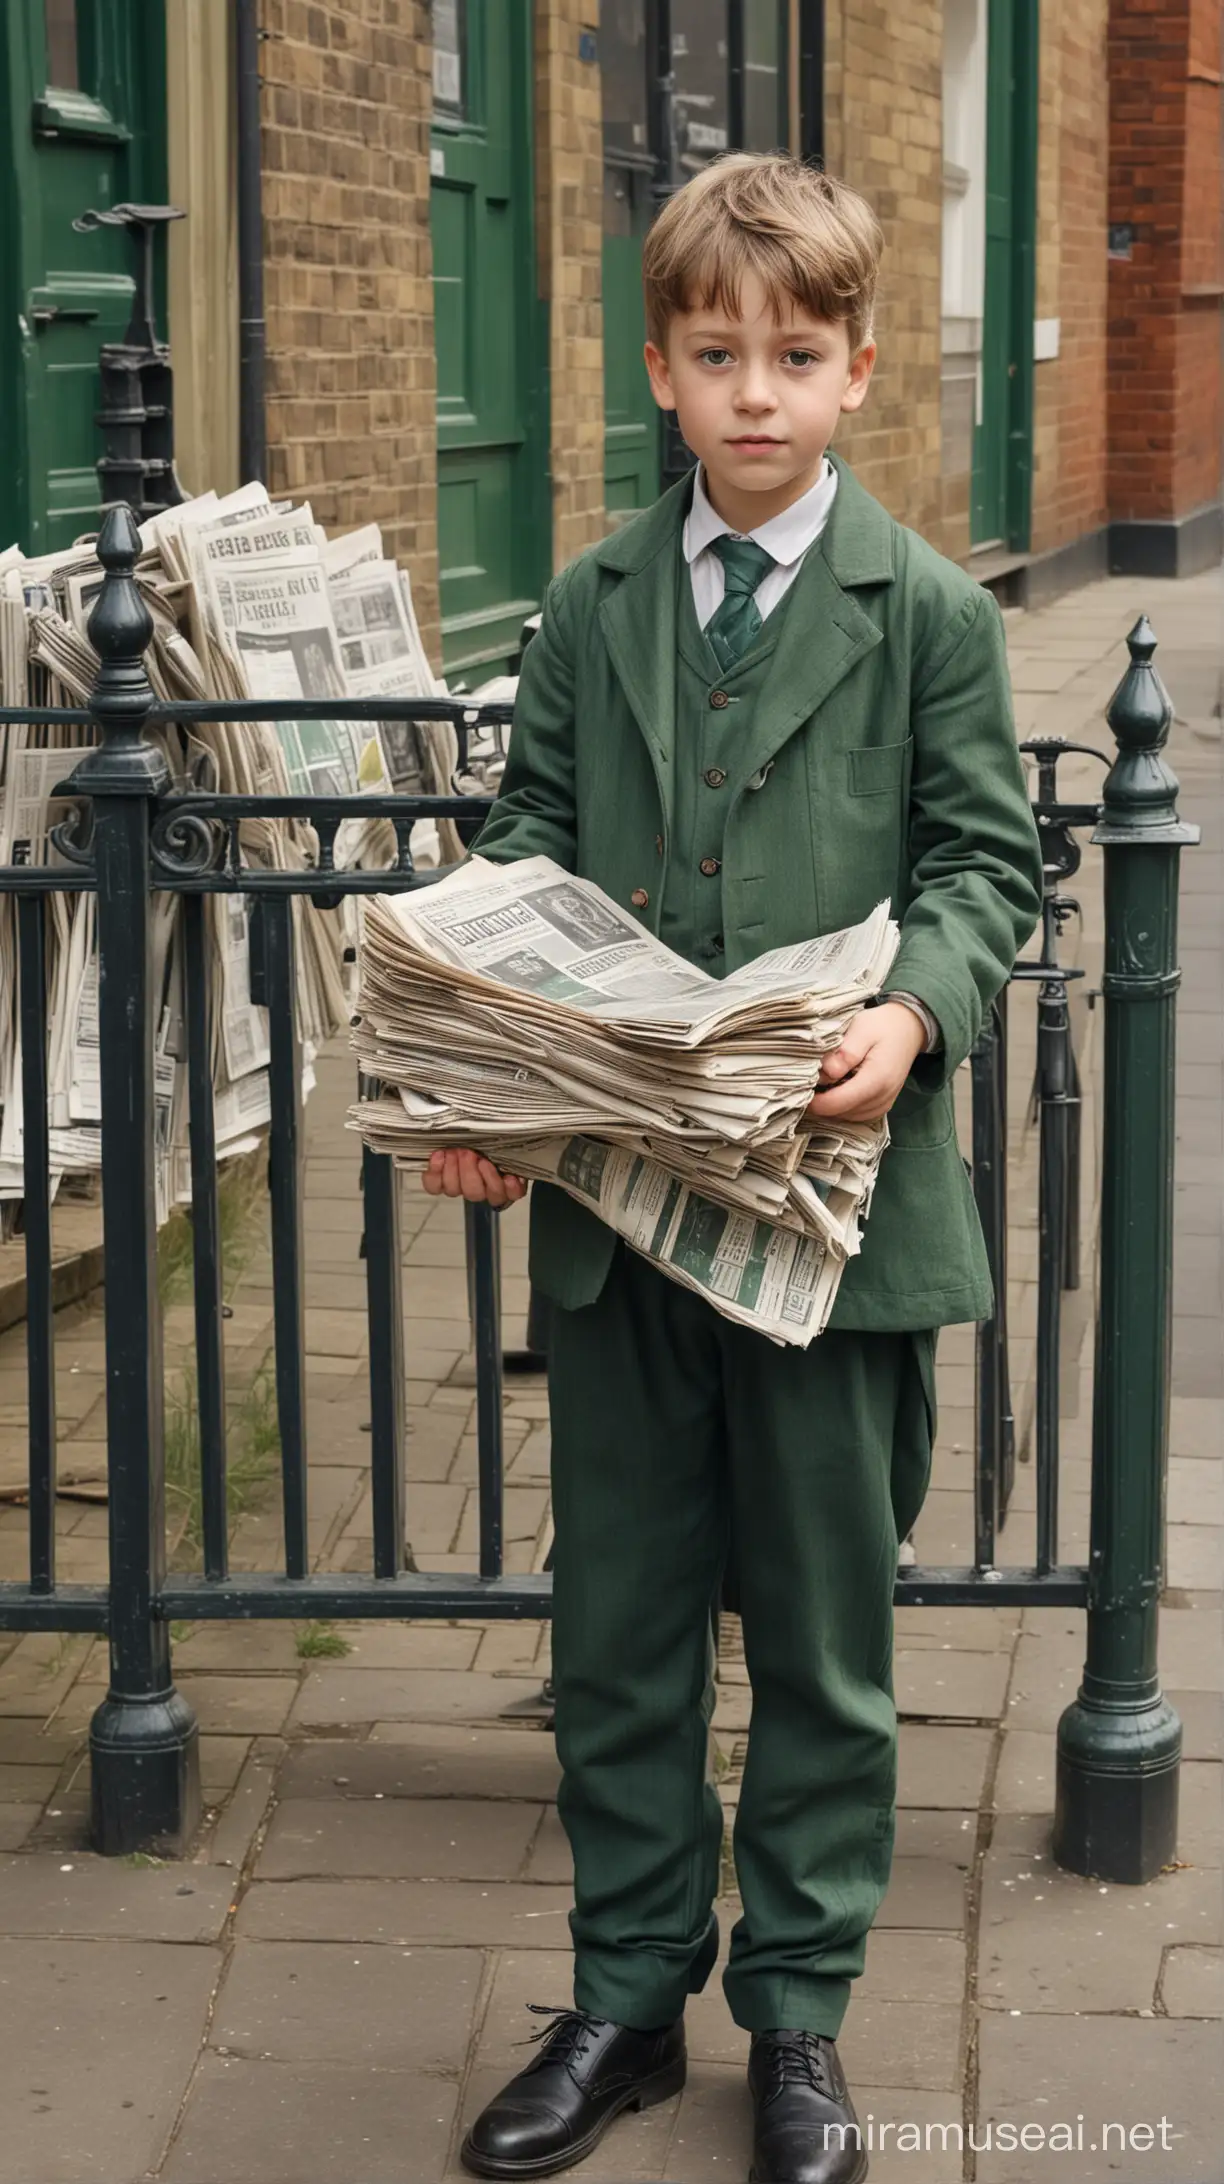 Victorian Boy Standing on Green Street with Newspapers Bench